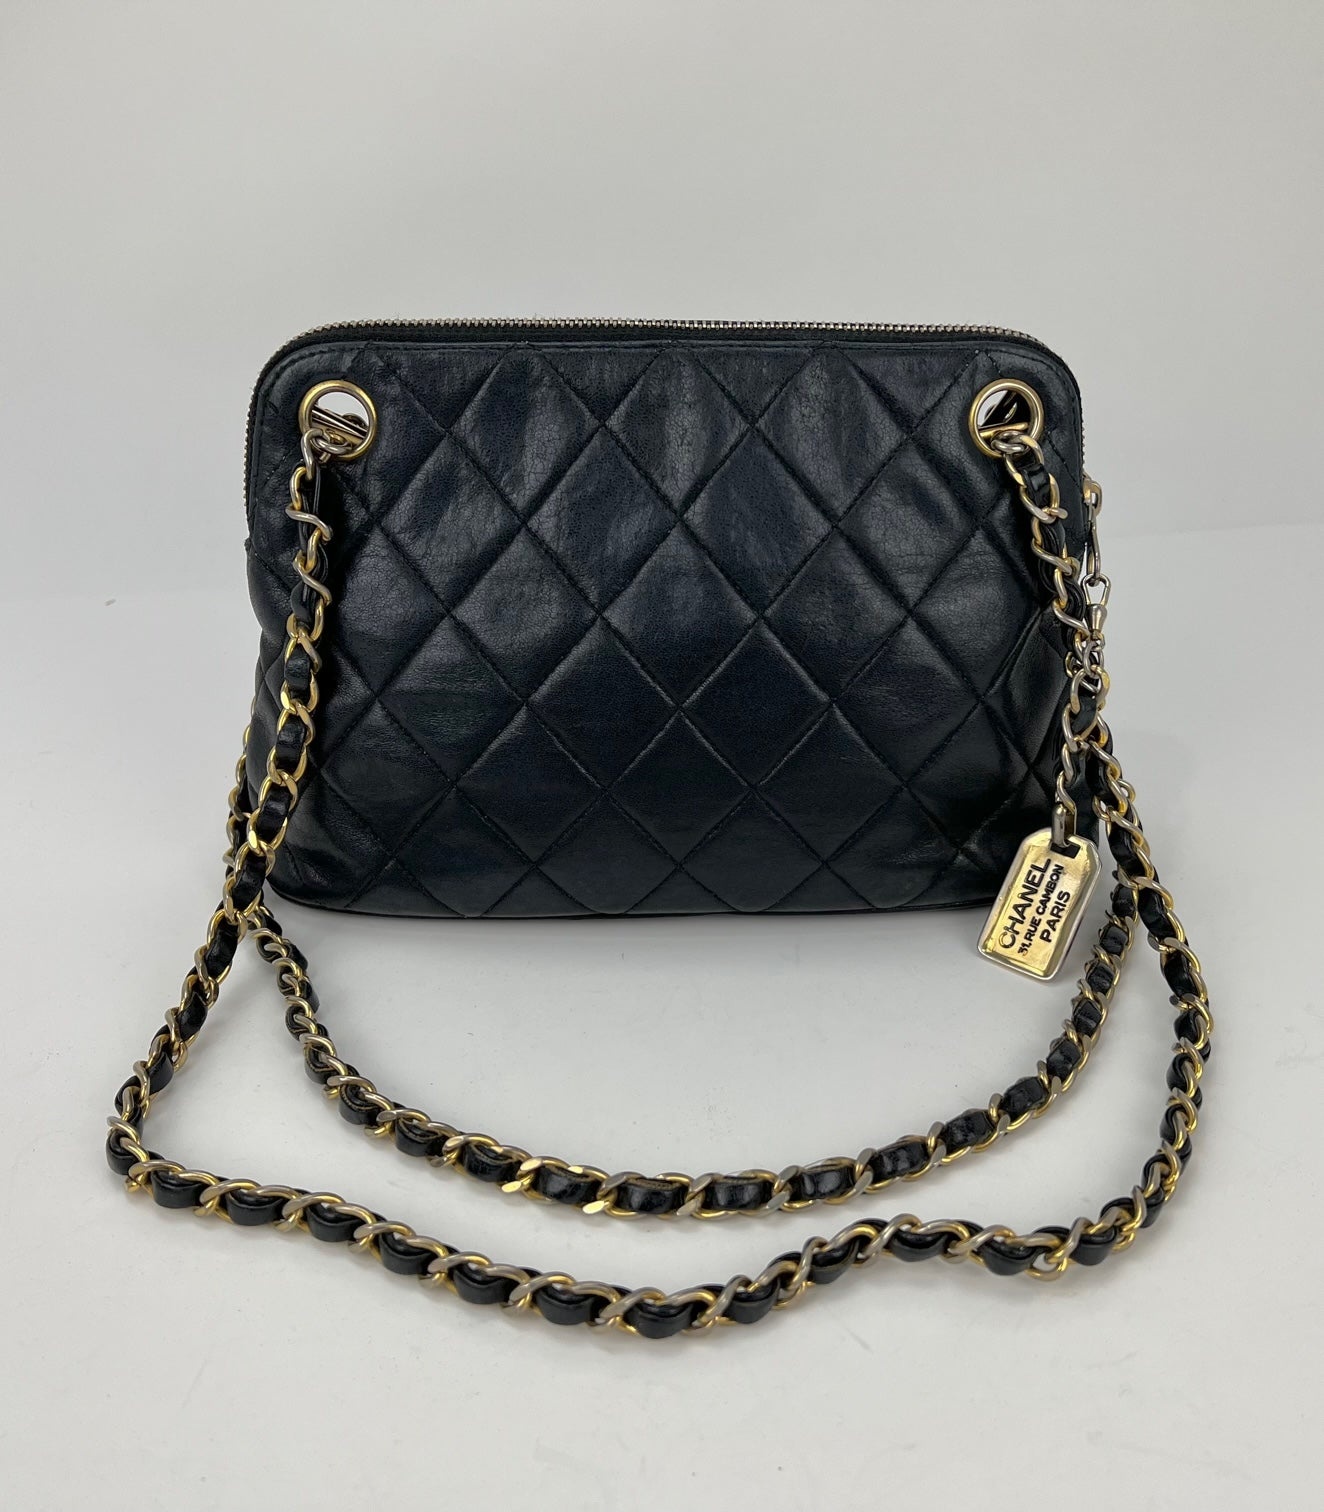 CHANEL Bag Quilted Lambskin Leather Chain Vintage Black Mini Shoulder Bag Preowned - 7